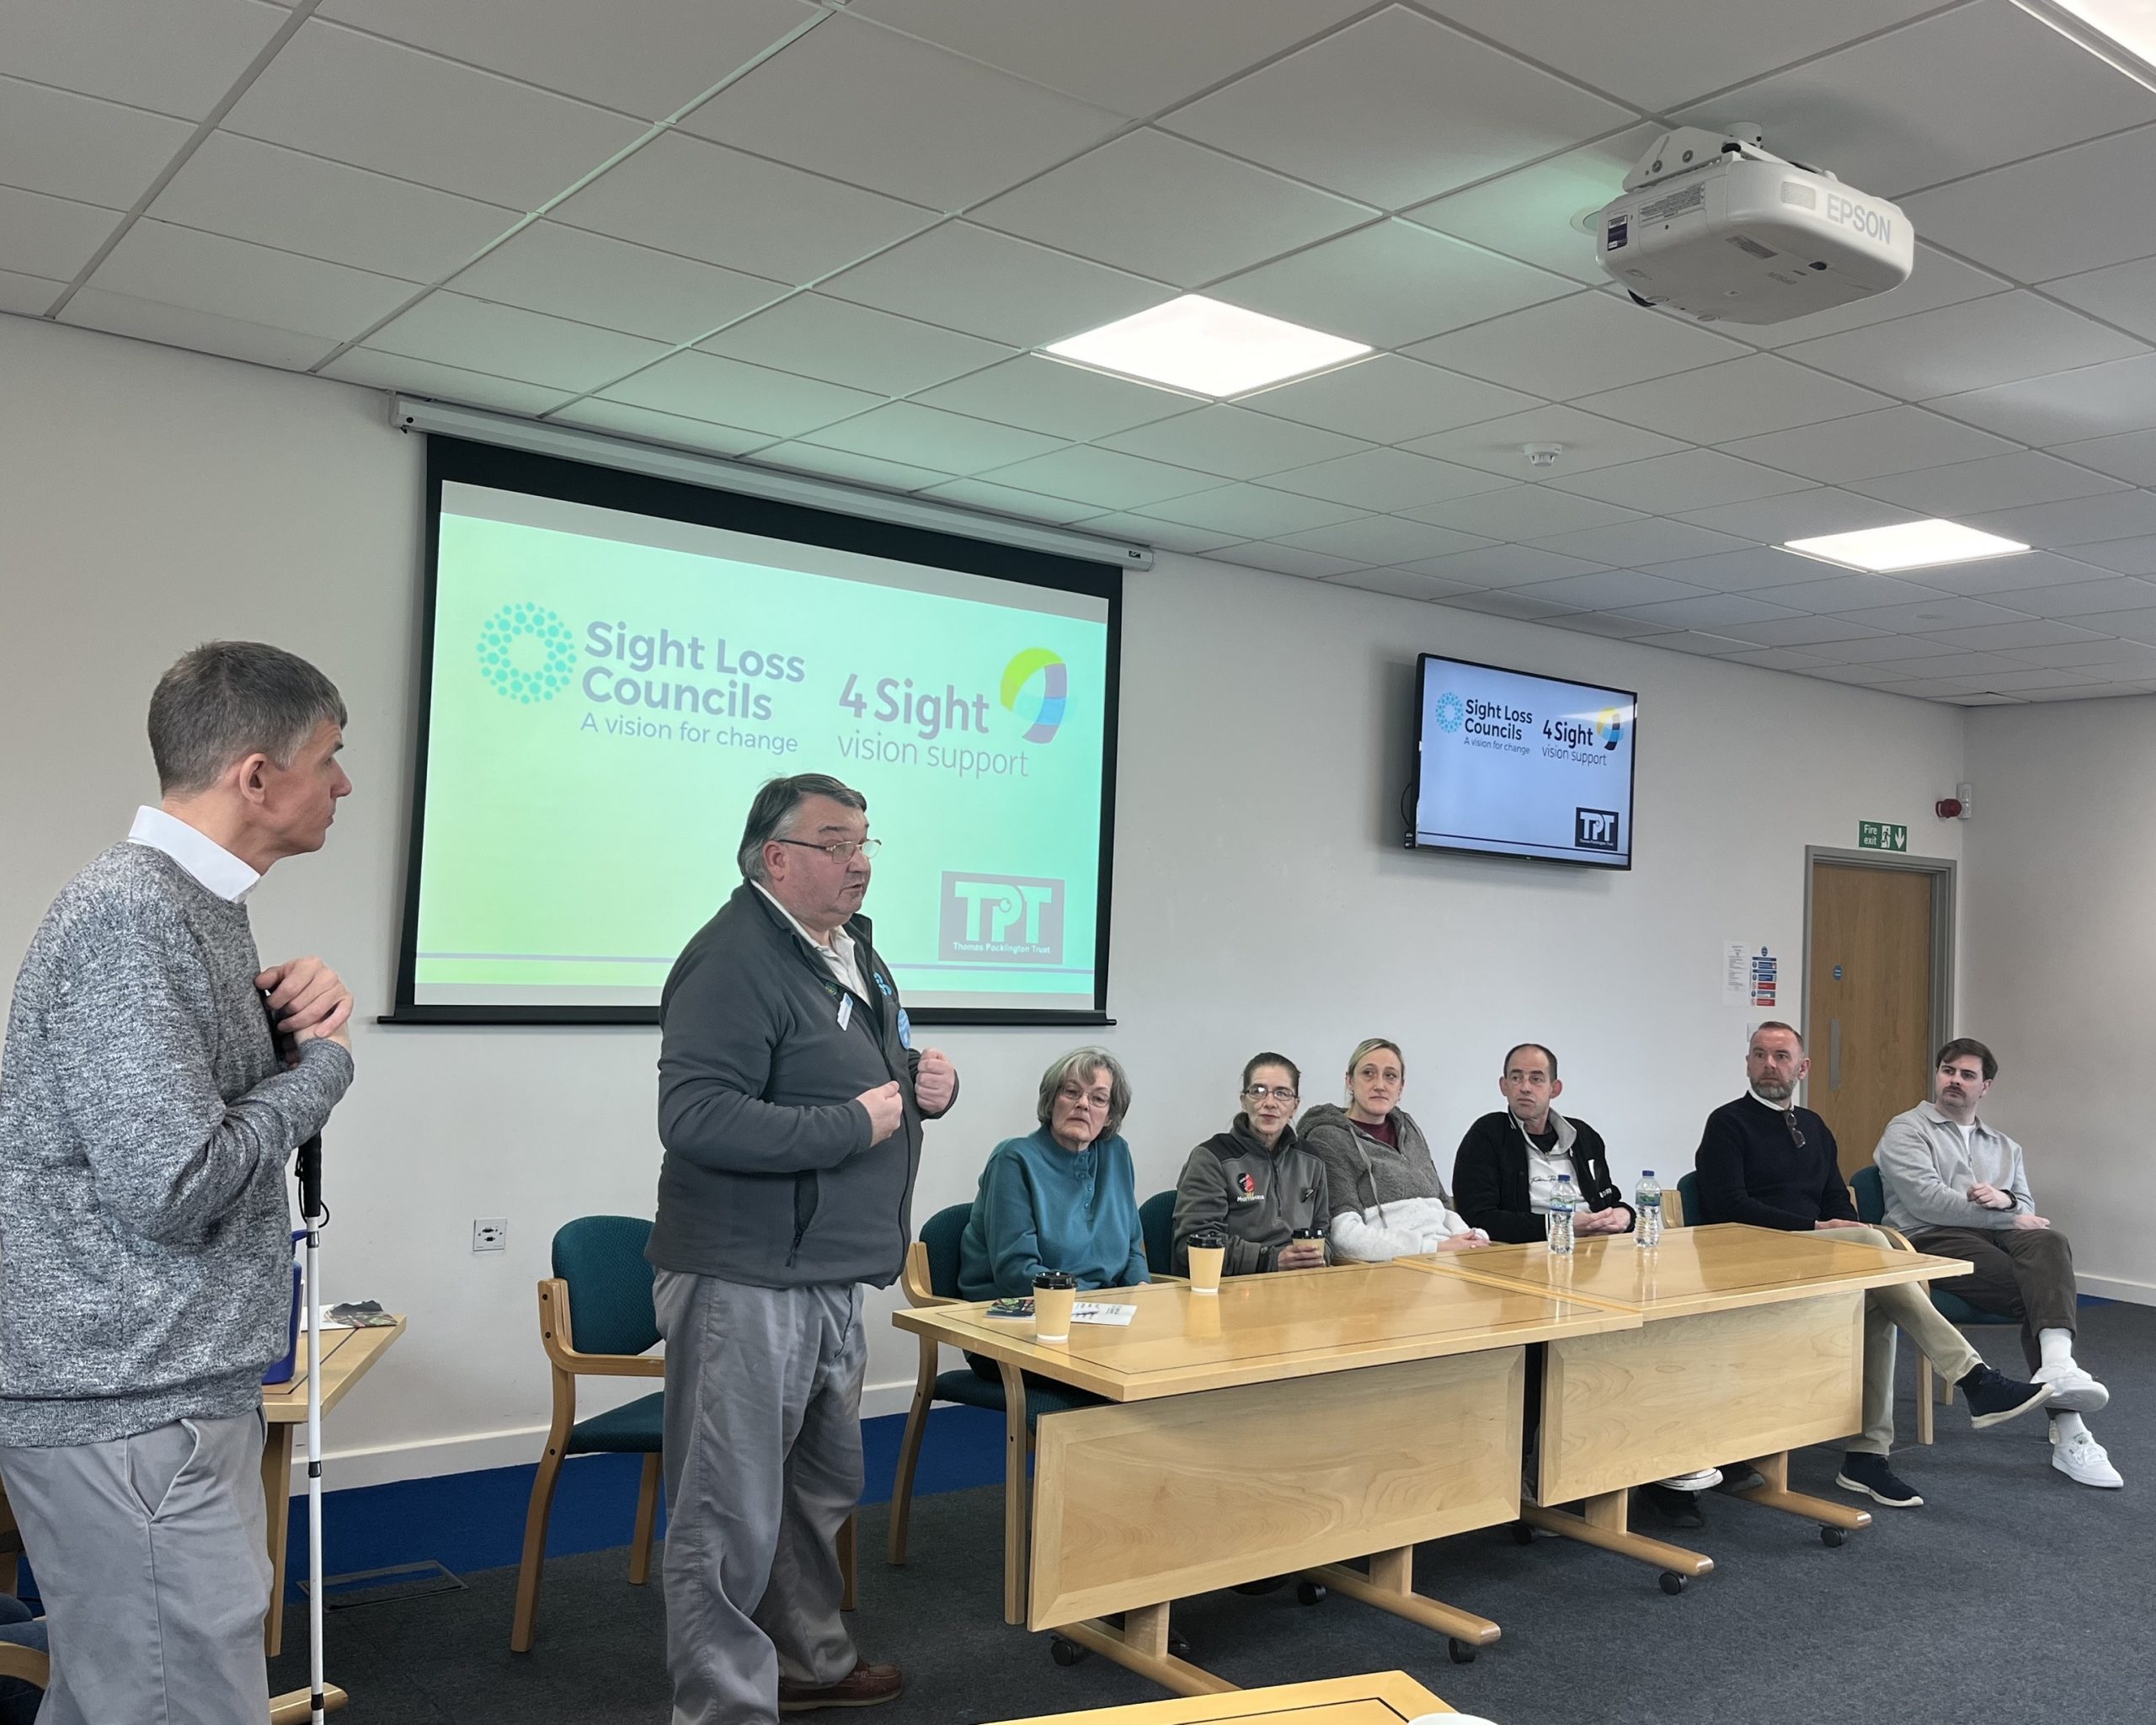 Our guest speakers, from left to right: Dave Smith, Engagement Manager for South East England, Bob Smytherman, Co-op, Bridgett Hunter, Sainsburys, Jo Easey and colleagues from Morrisons, Oran McAlistair, NaviLens, and Paul Gallagher, Procter and Gamble.